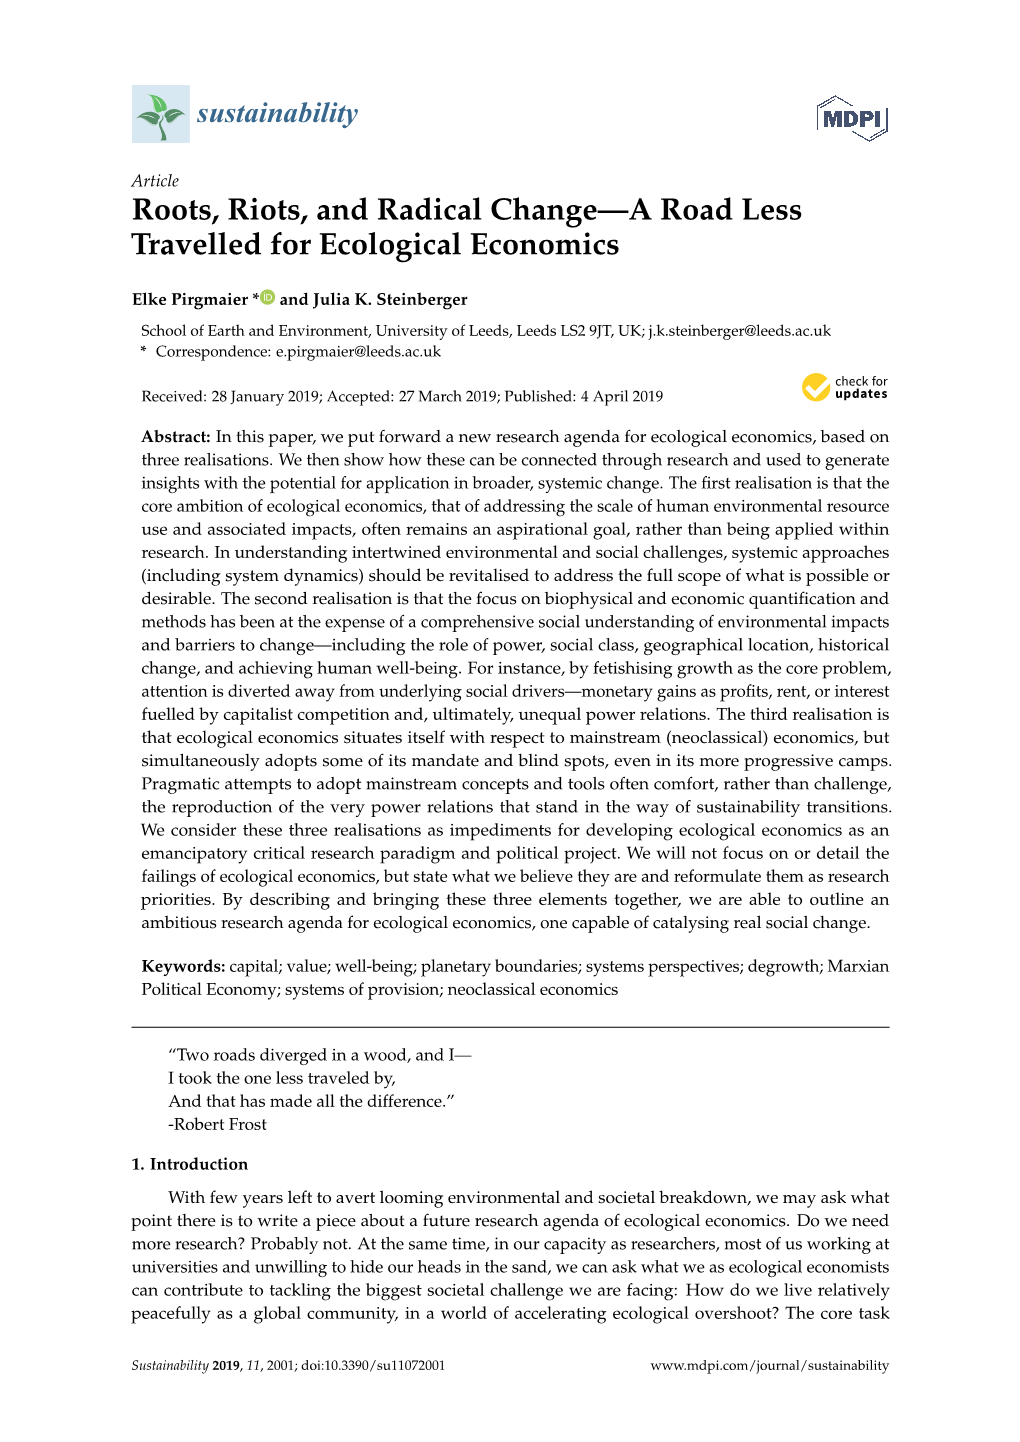 Roots, Riots, and Radical Change—A Road Less Travelled for Ecological Economics